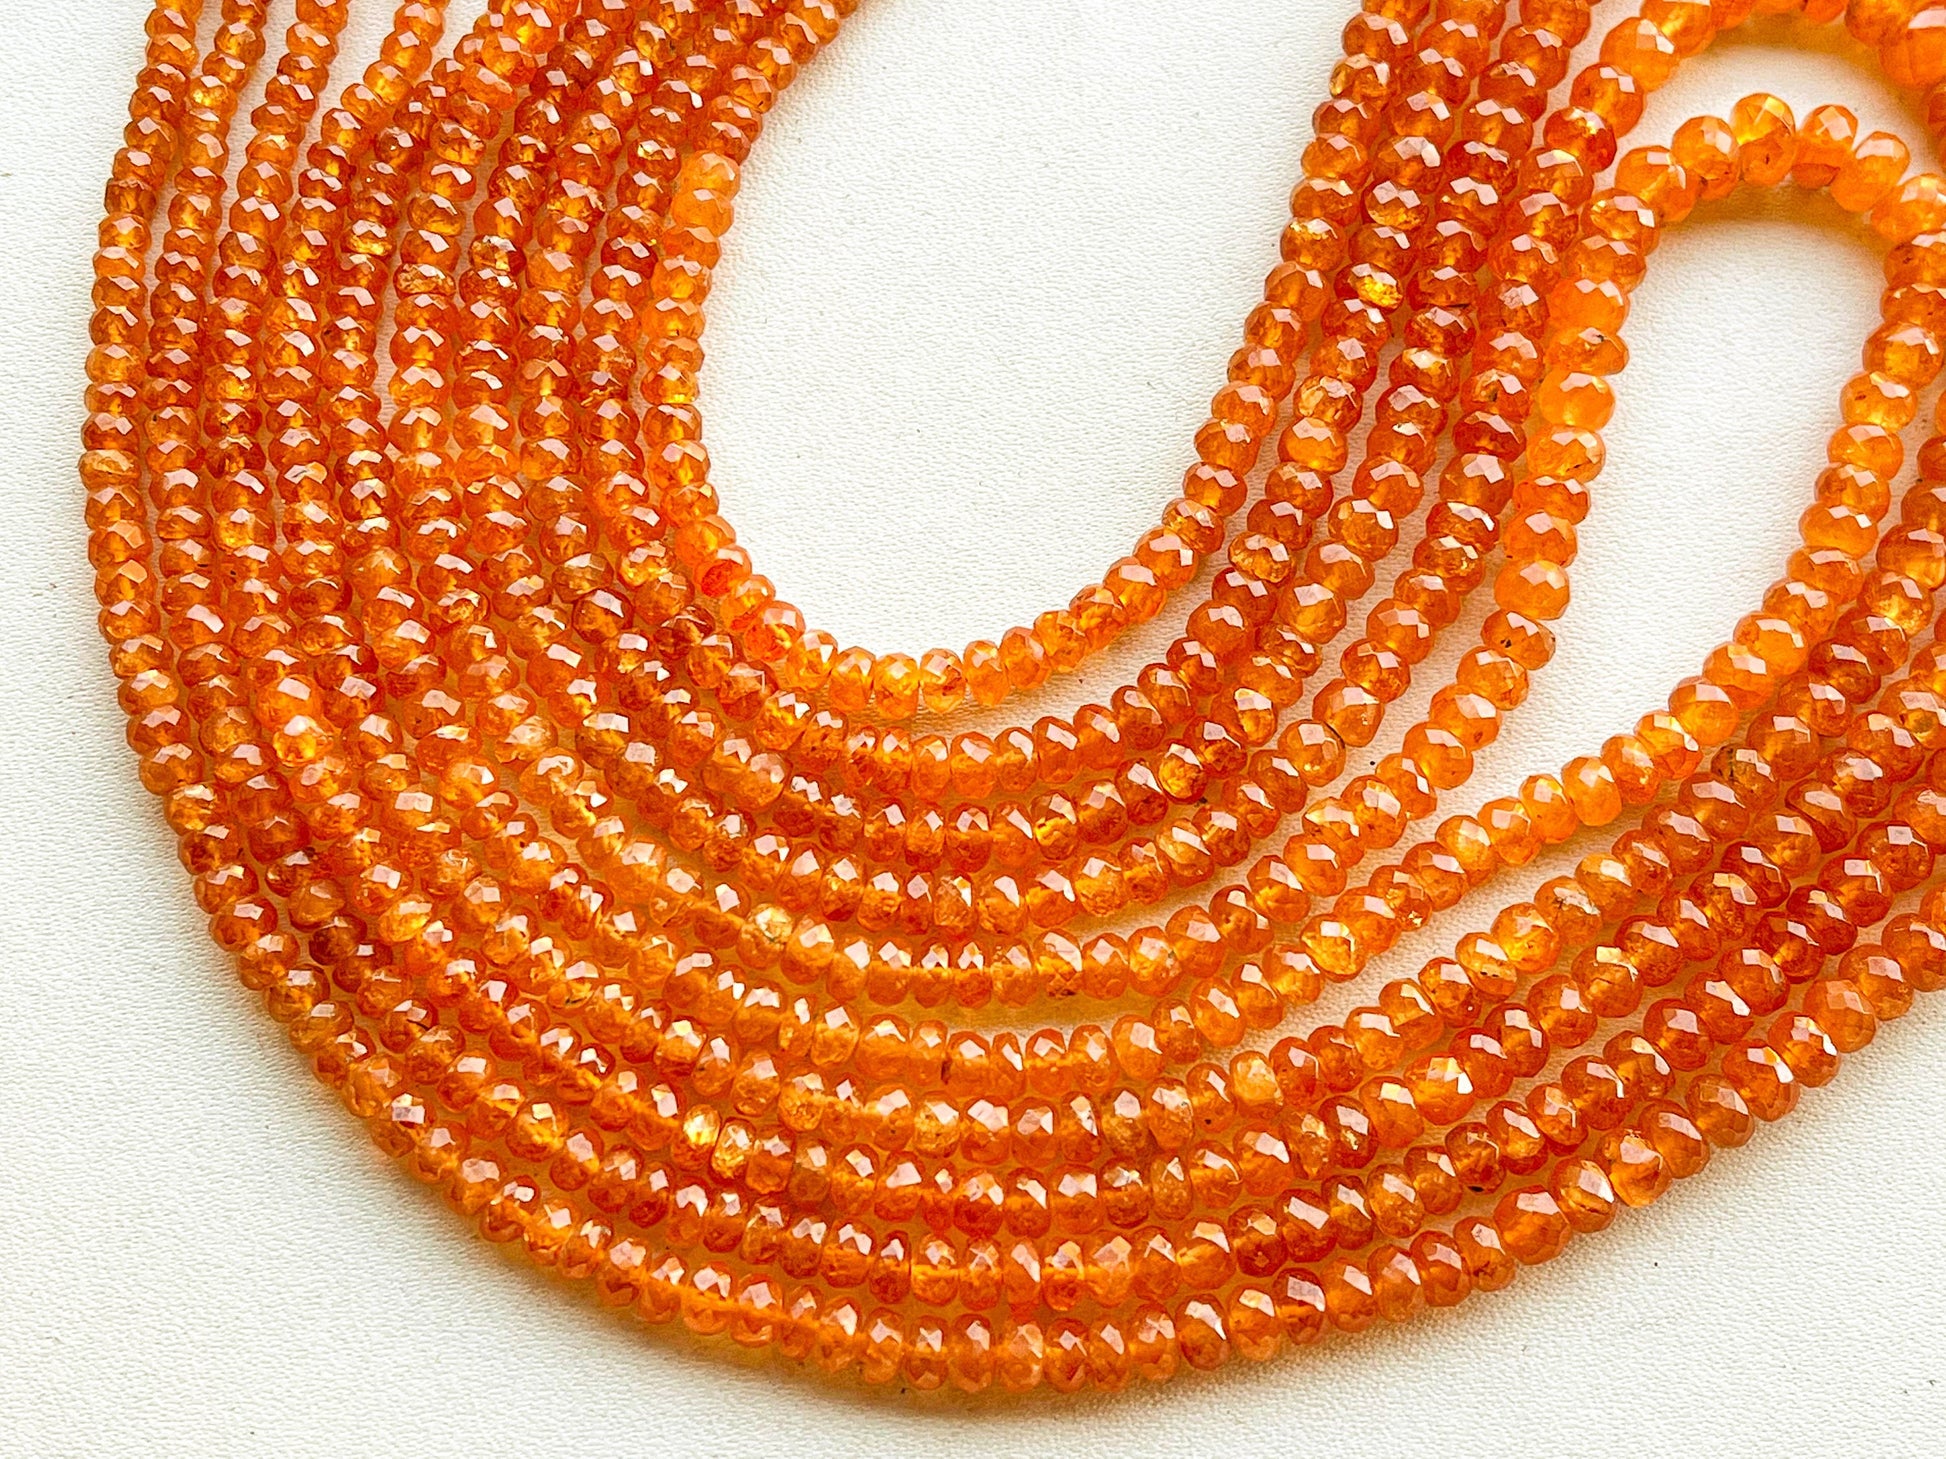 16 " Spessartite Garnet Faceted Rondelle Beads BFYJ234 - Beadsforyourjewelry